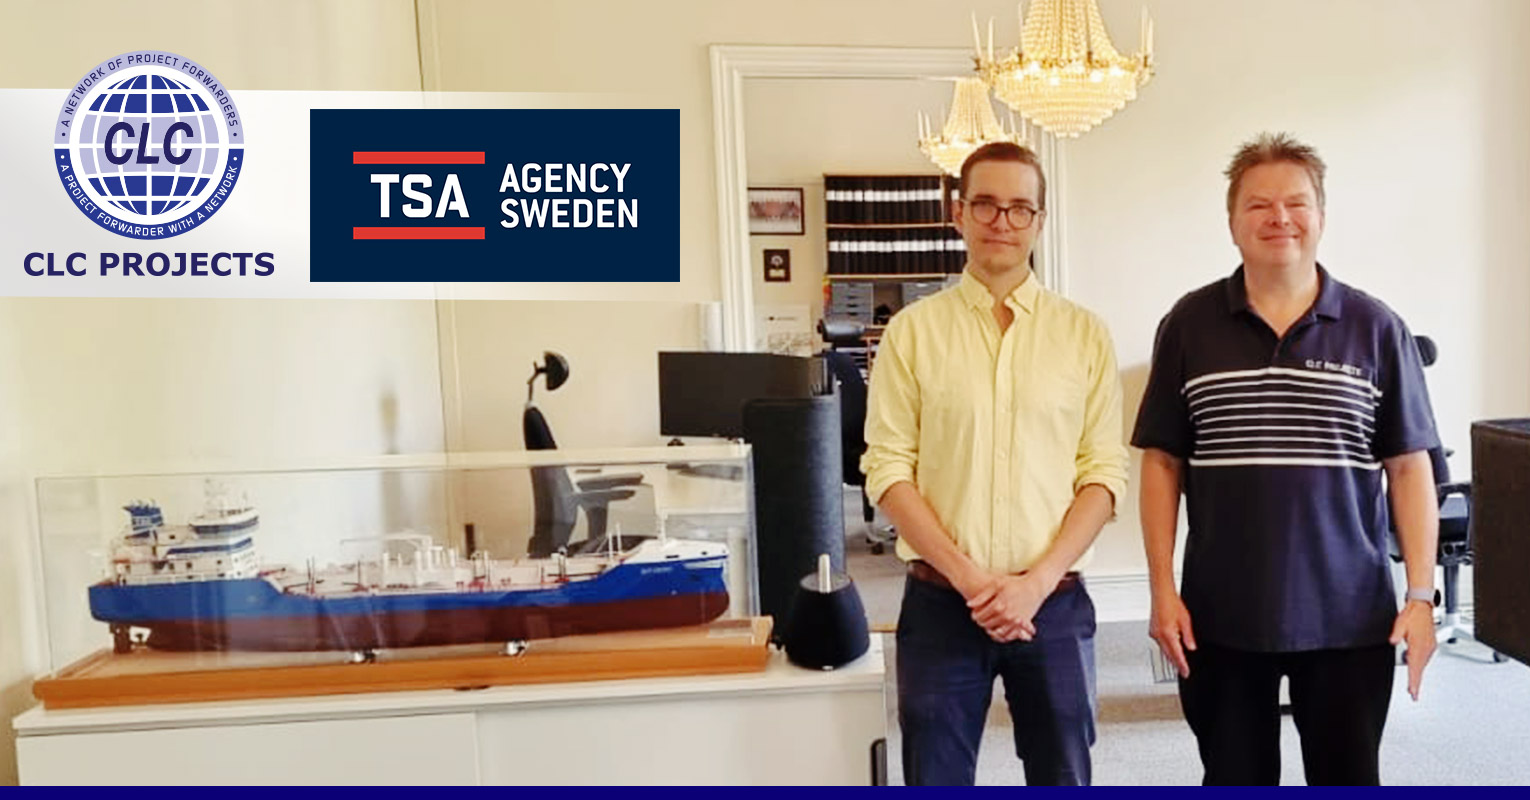 CLC Projects met with TSA Agency Sweden